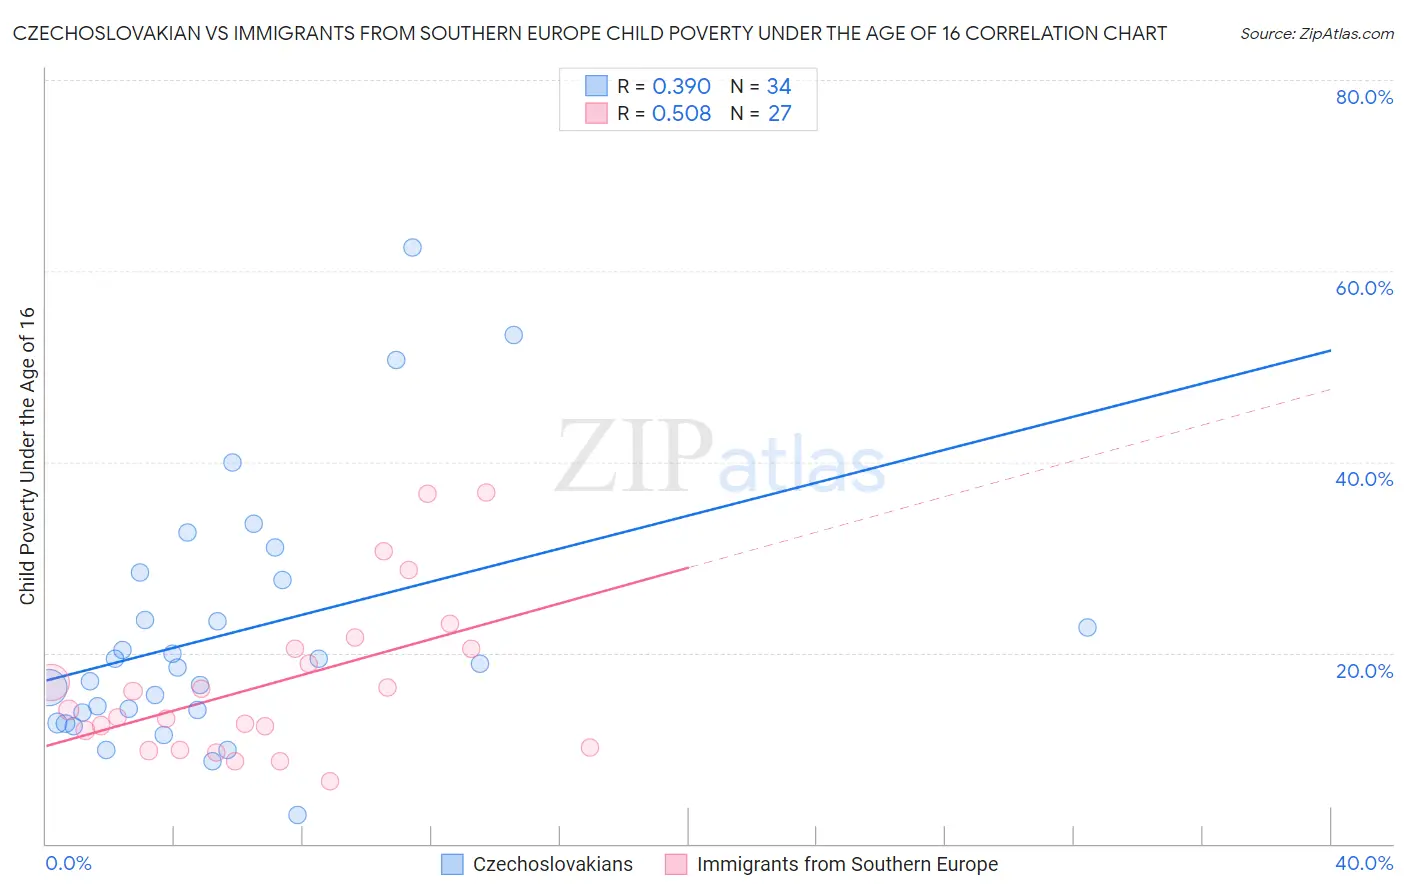 Czechoslovakian vs Immigrants from Southern Europe Child Poverty Under the Age of 16